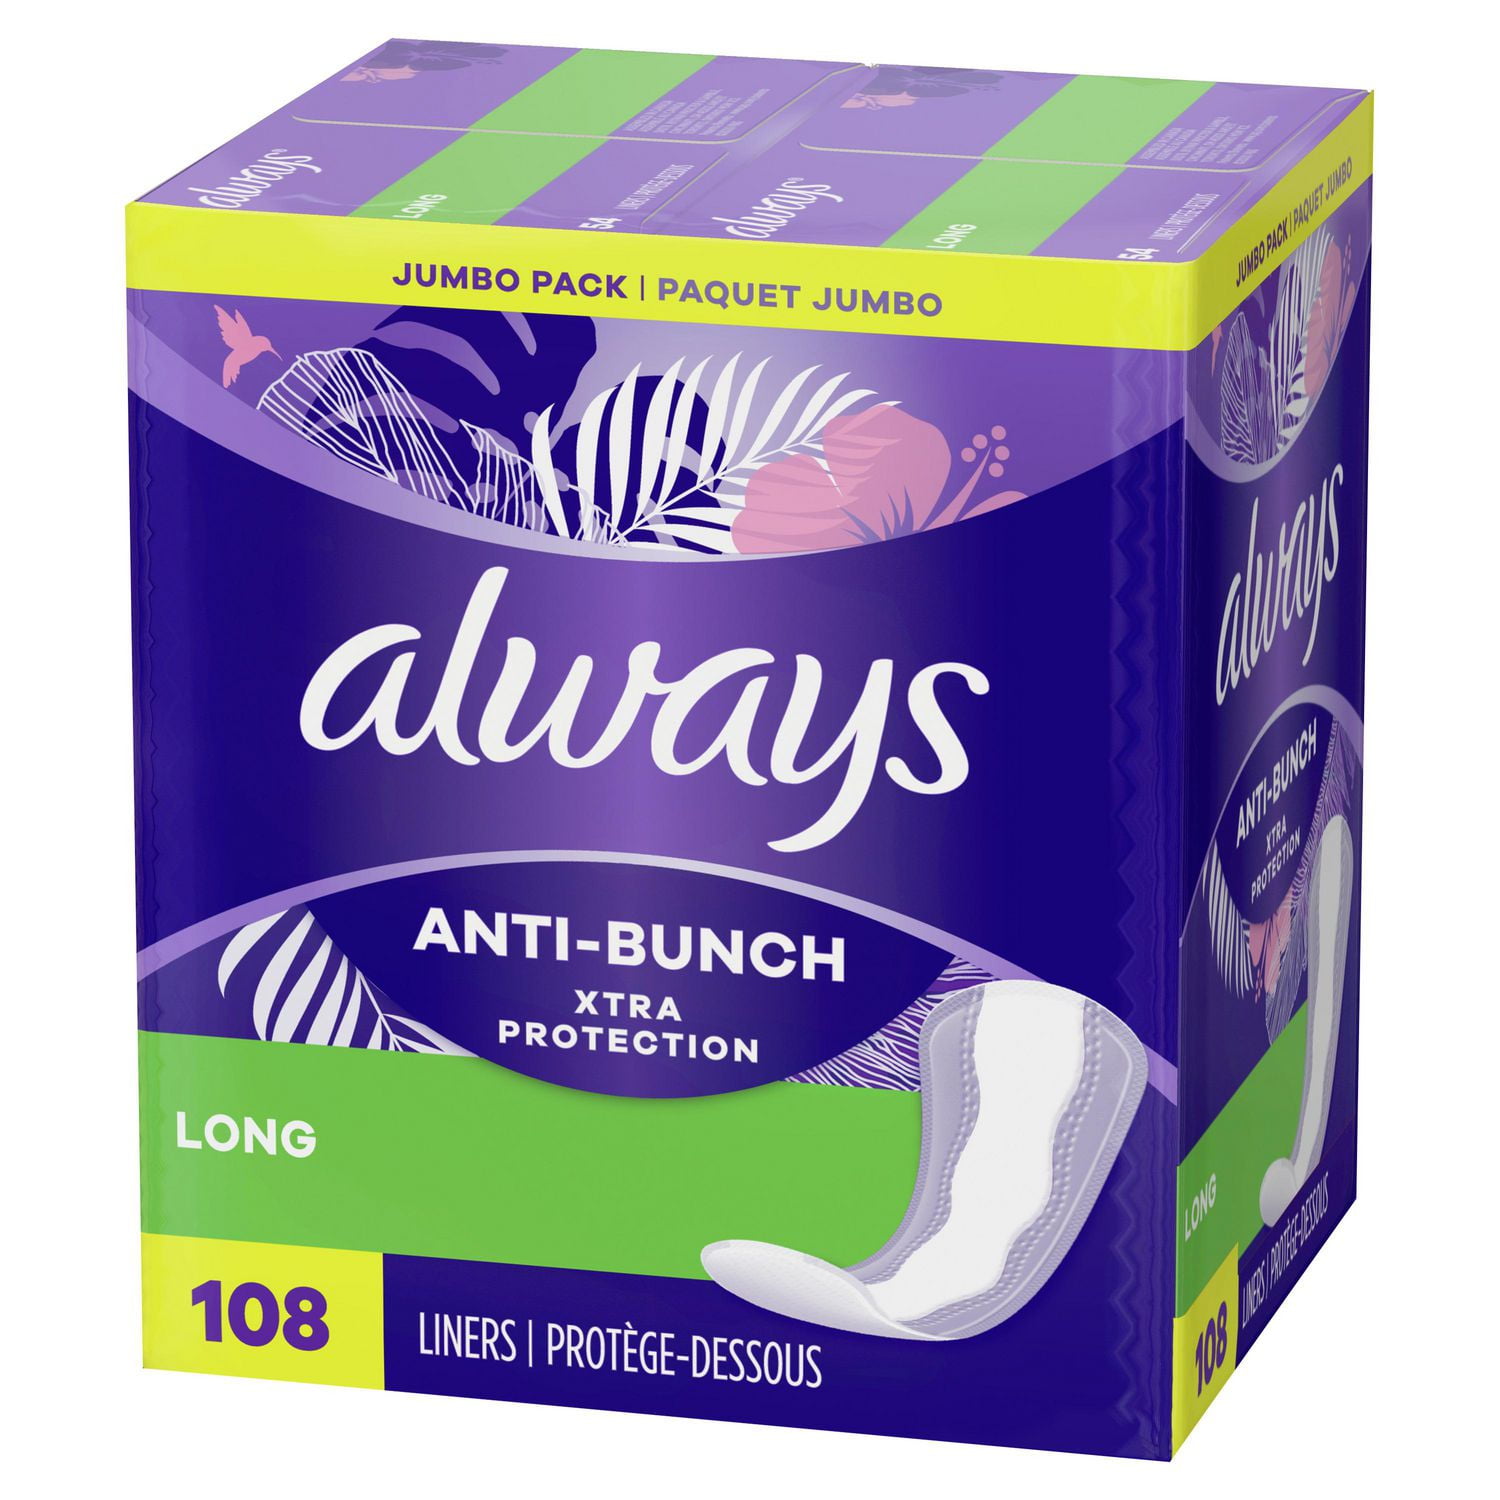 Always Anti-Bunch Xtra Protection Daily Liners Long Unscented, 108 Liners 